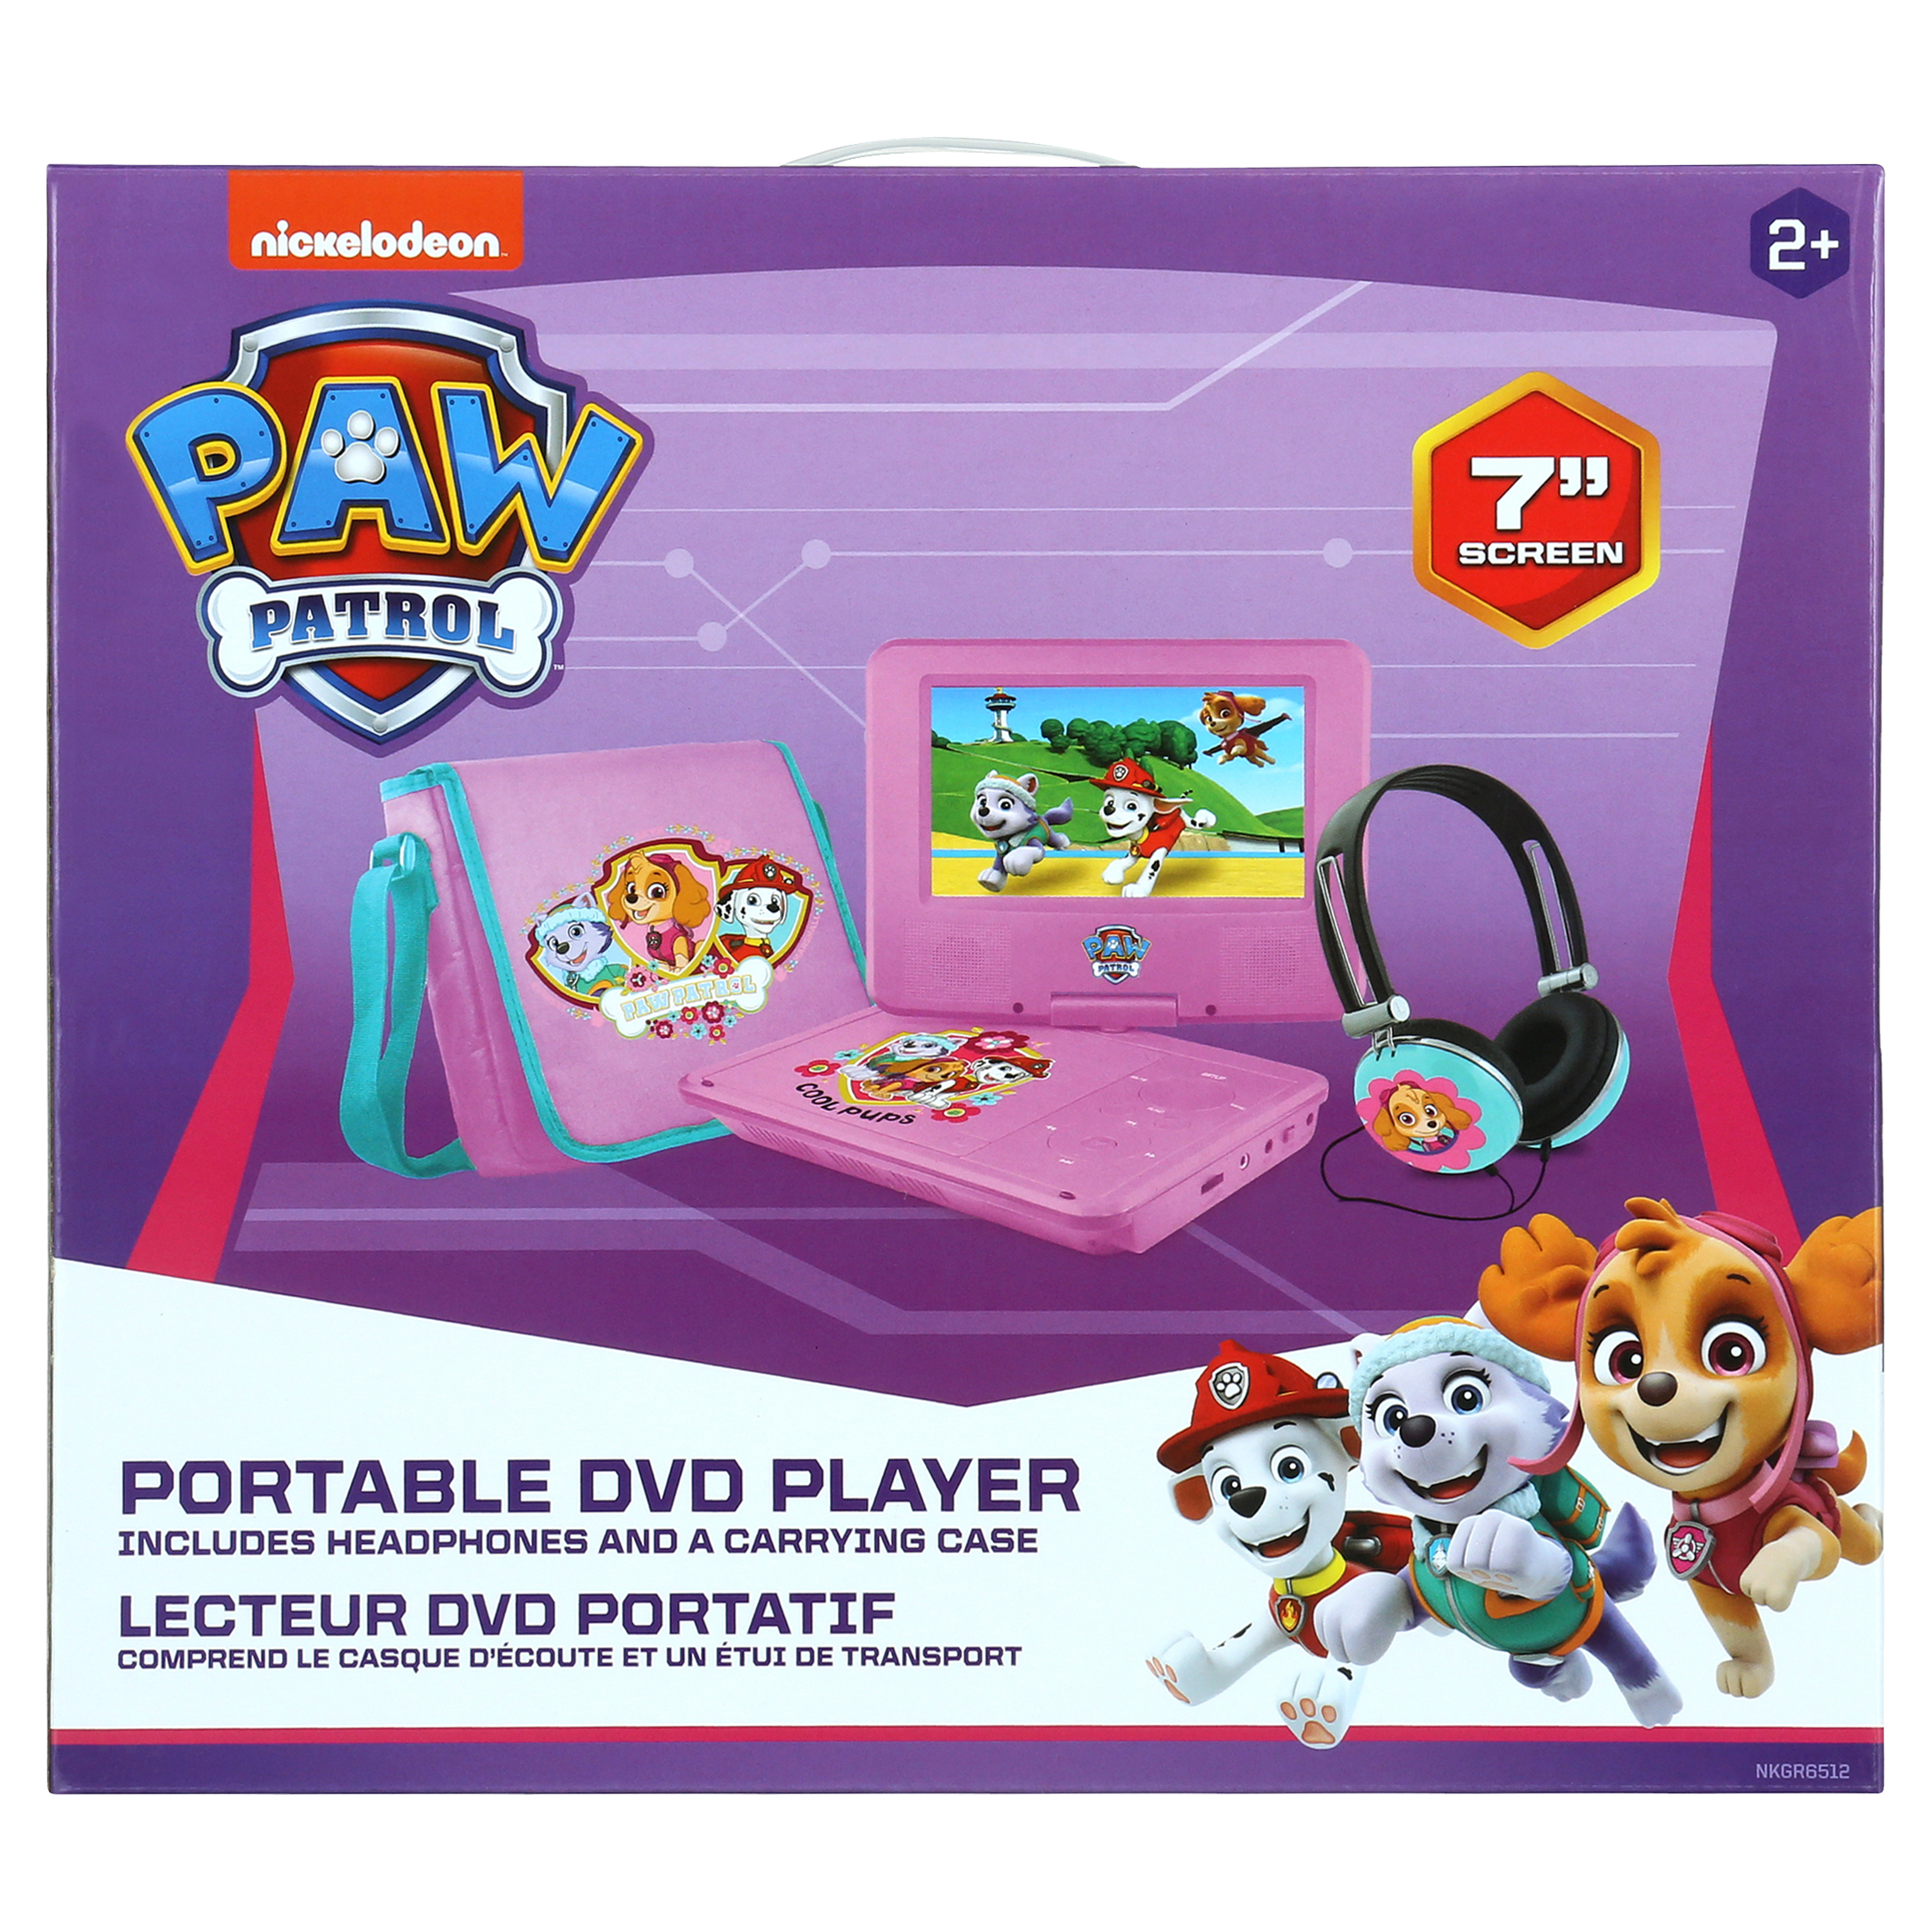 PAW Patrol 7" Portable DVD Player with Carrying Bag and Headphones, Pink - image 5 of 7